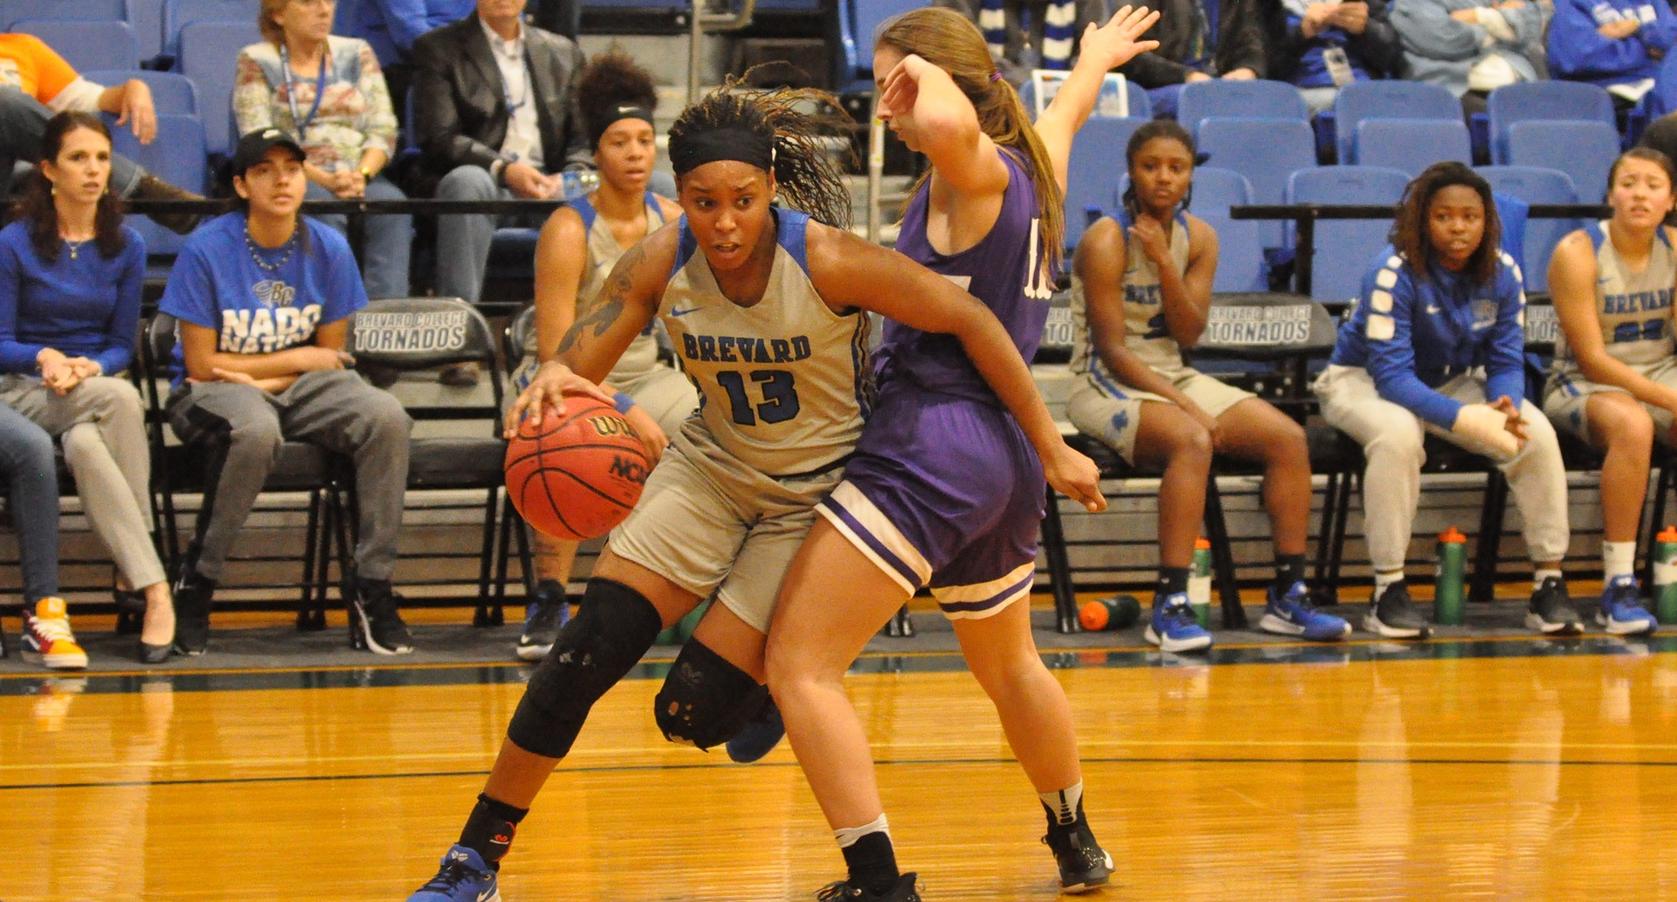 Junior forward Destiny Williams scored 13 points, including nine made free throws, in a narrow loss to Maryville (Photo courtesy of Tommy Moss).